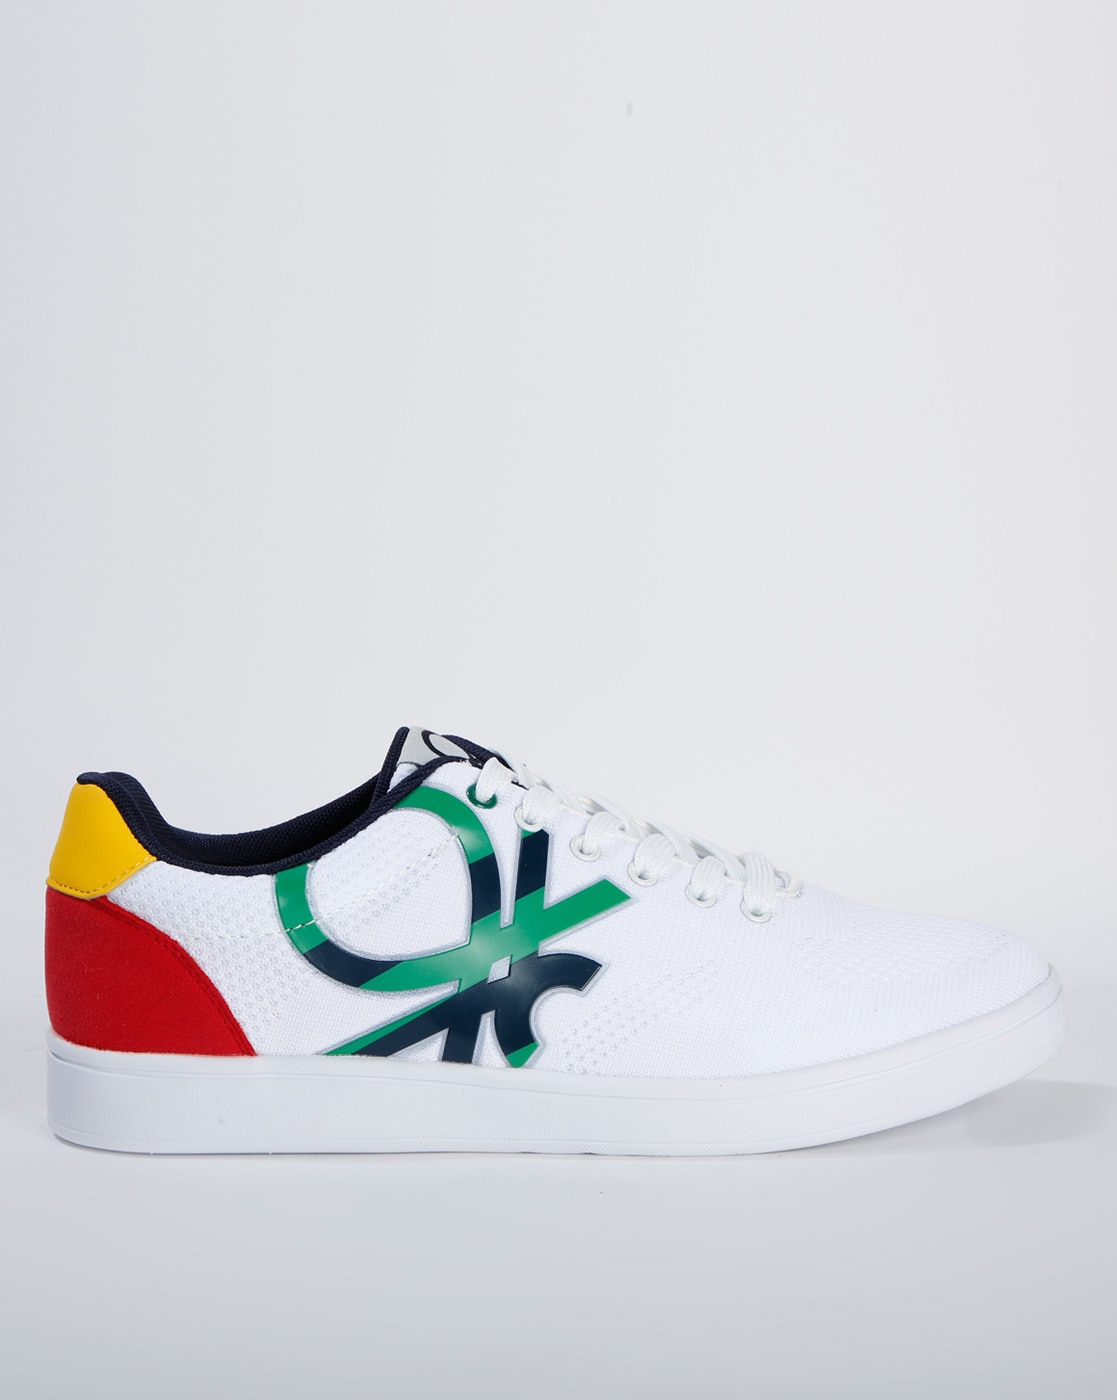 Buy United Colors of Benetton Men Sneakers at Amazon.in